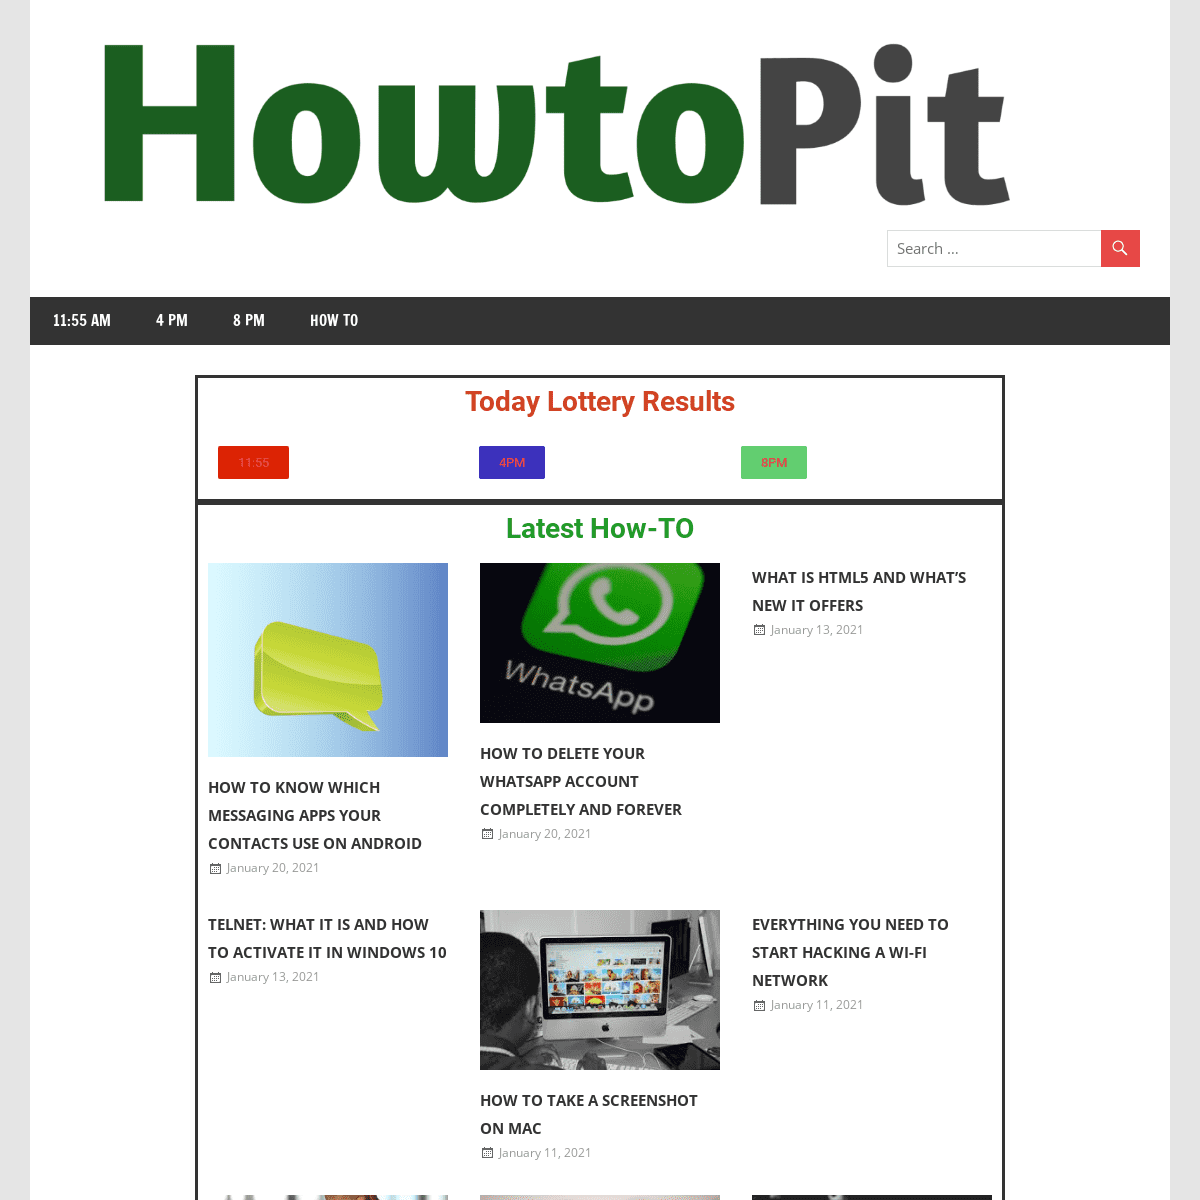 A complete backup of https://howtopit.com